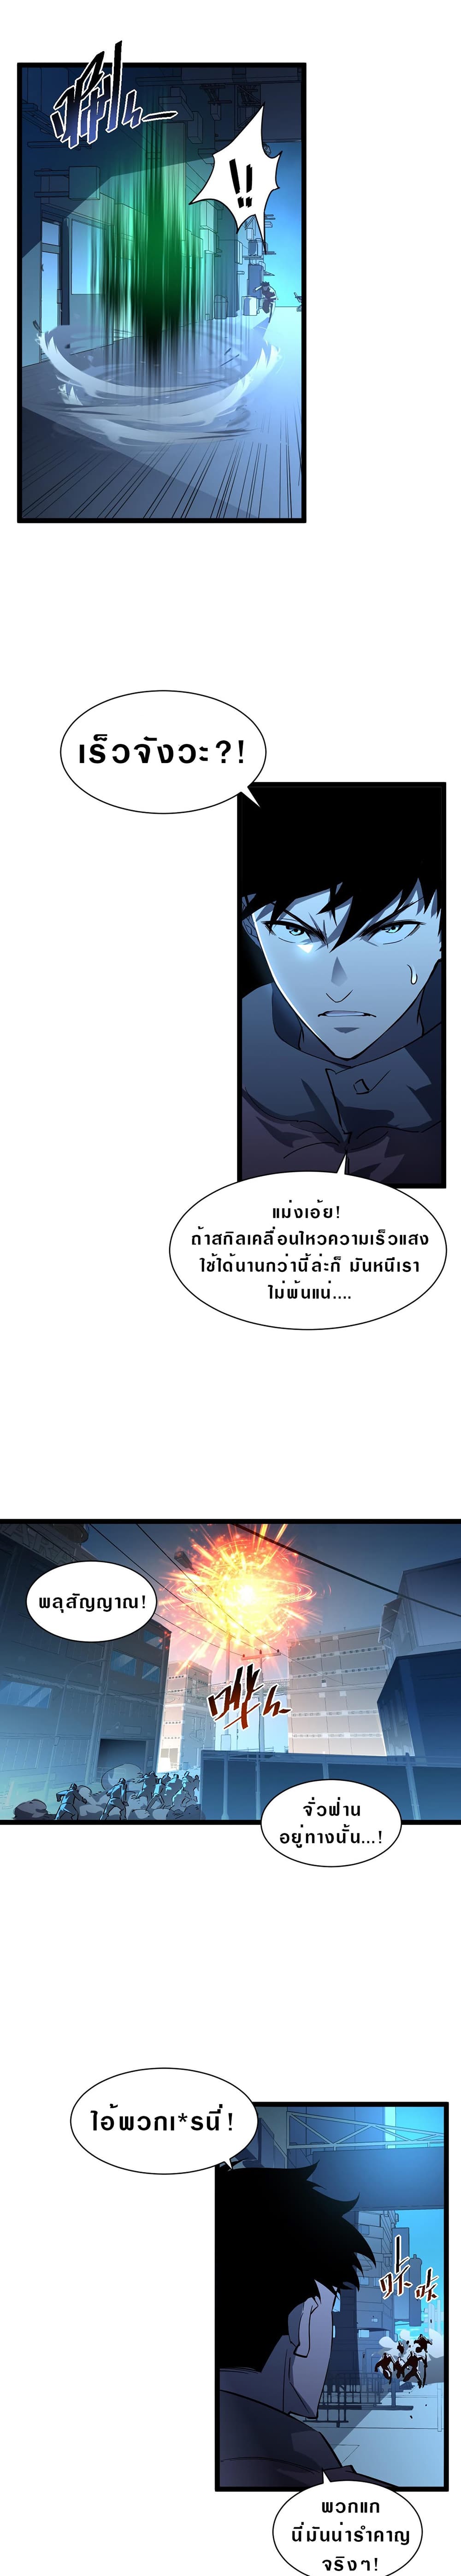 Rise From The Rubble เศษซากวันสิ้นโลก 57-57